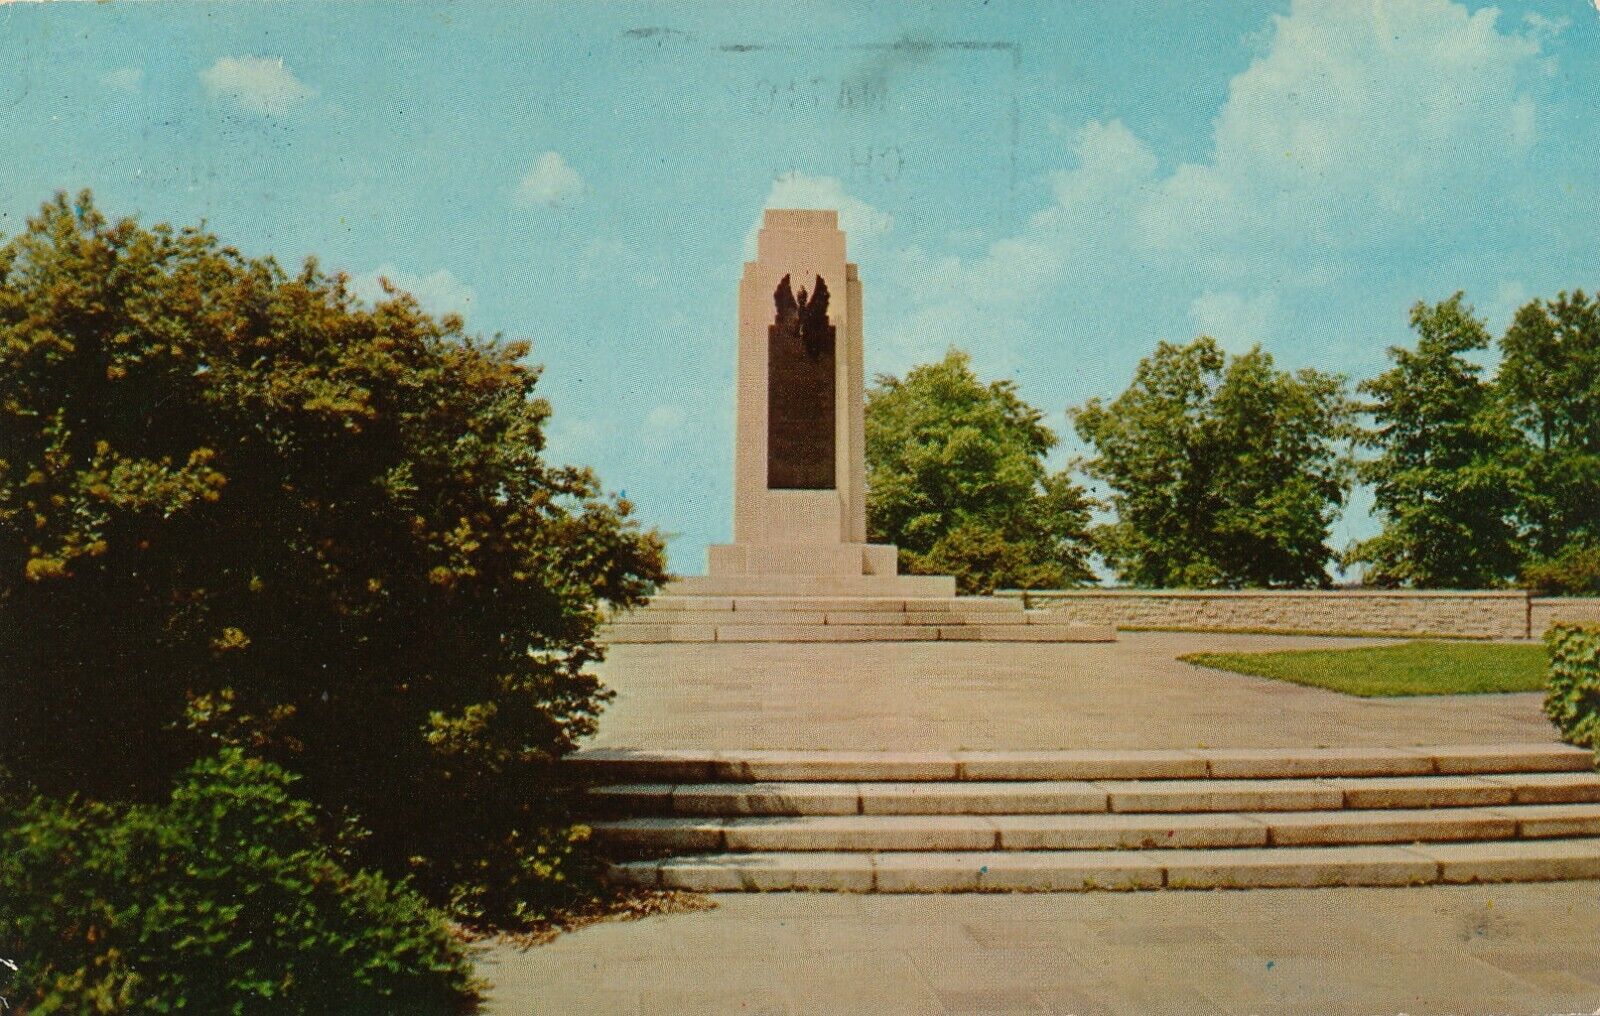 Wright Brothers Memorial in Dayton, Ohio OH 1975 posted vintage postcard